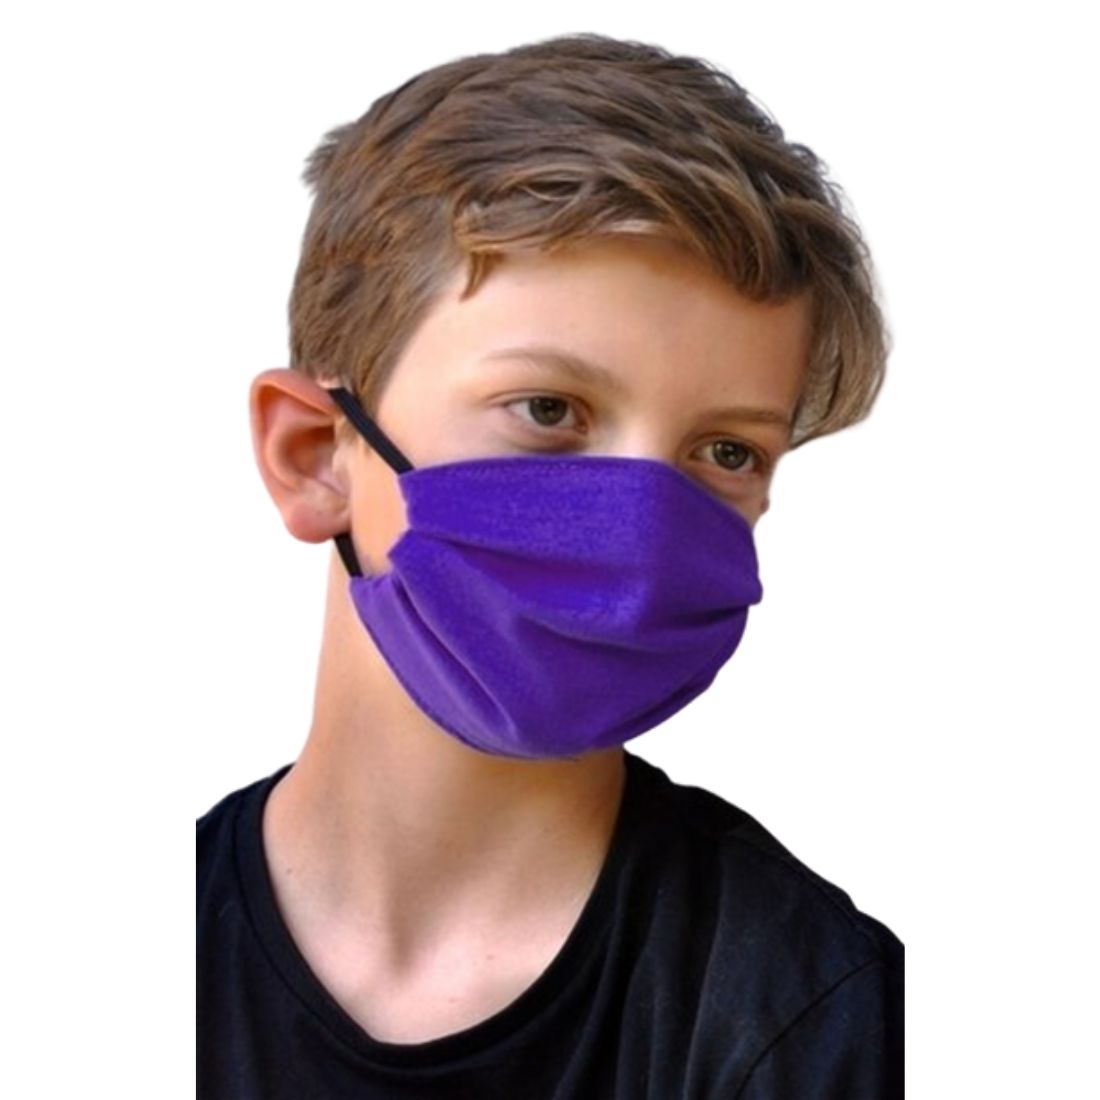 BraveFace Organic Reusable Face Mask Double Layer FRASER (1/2 Inch Gusset and Elastic), KIDS SIZE, Clearance 50% Off, Final Sale